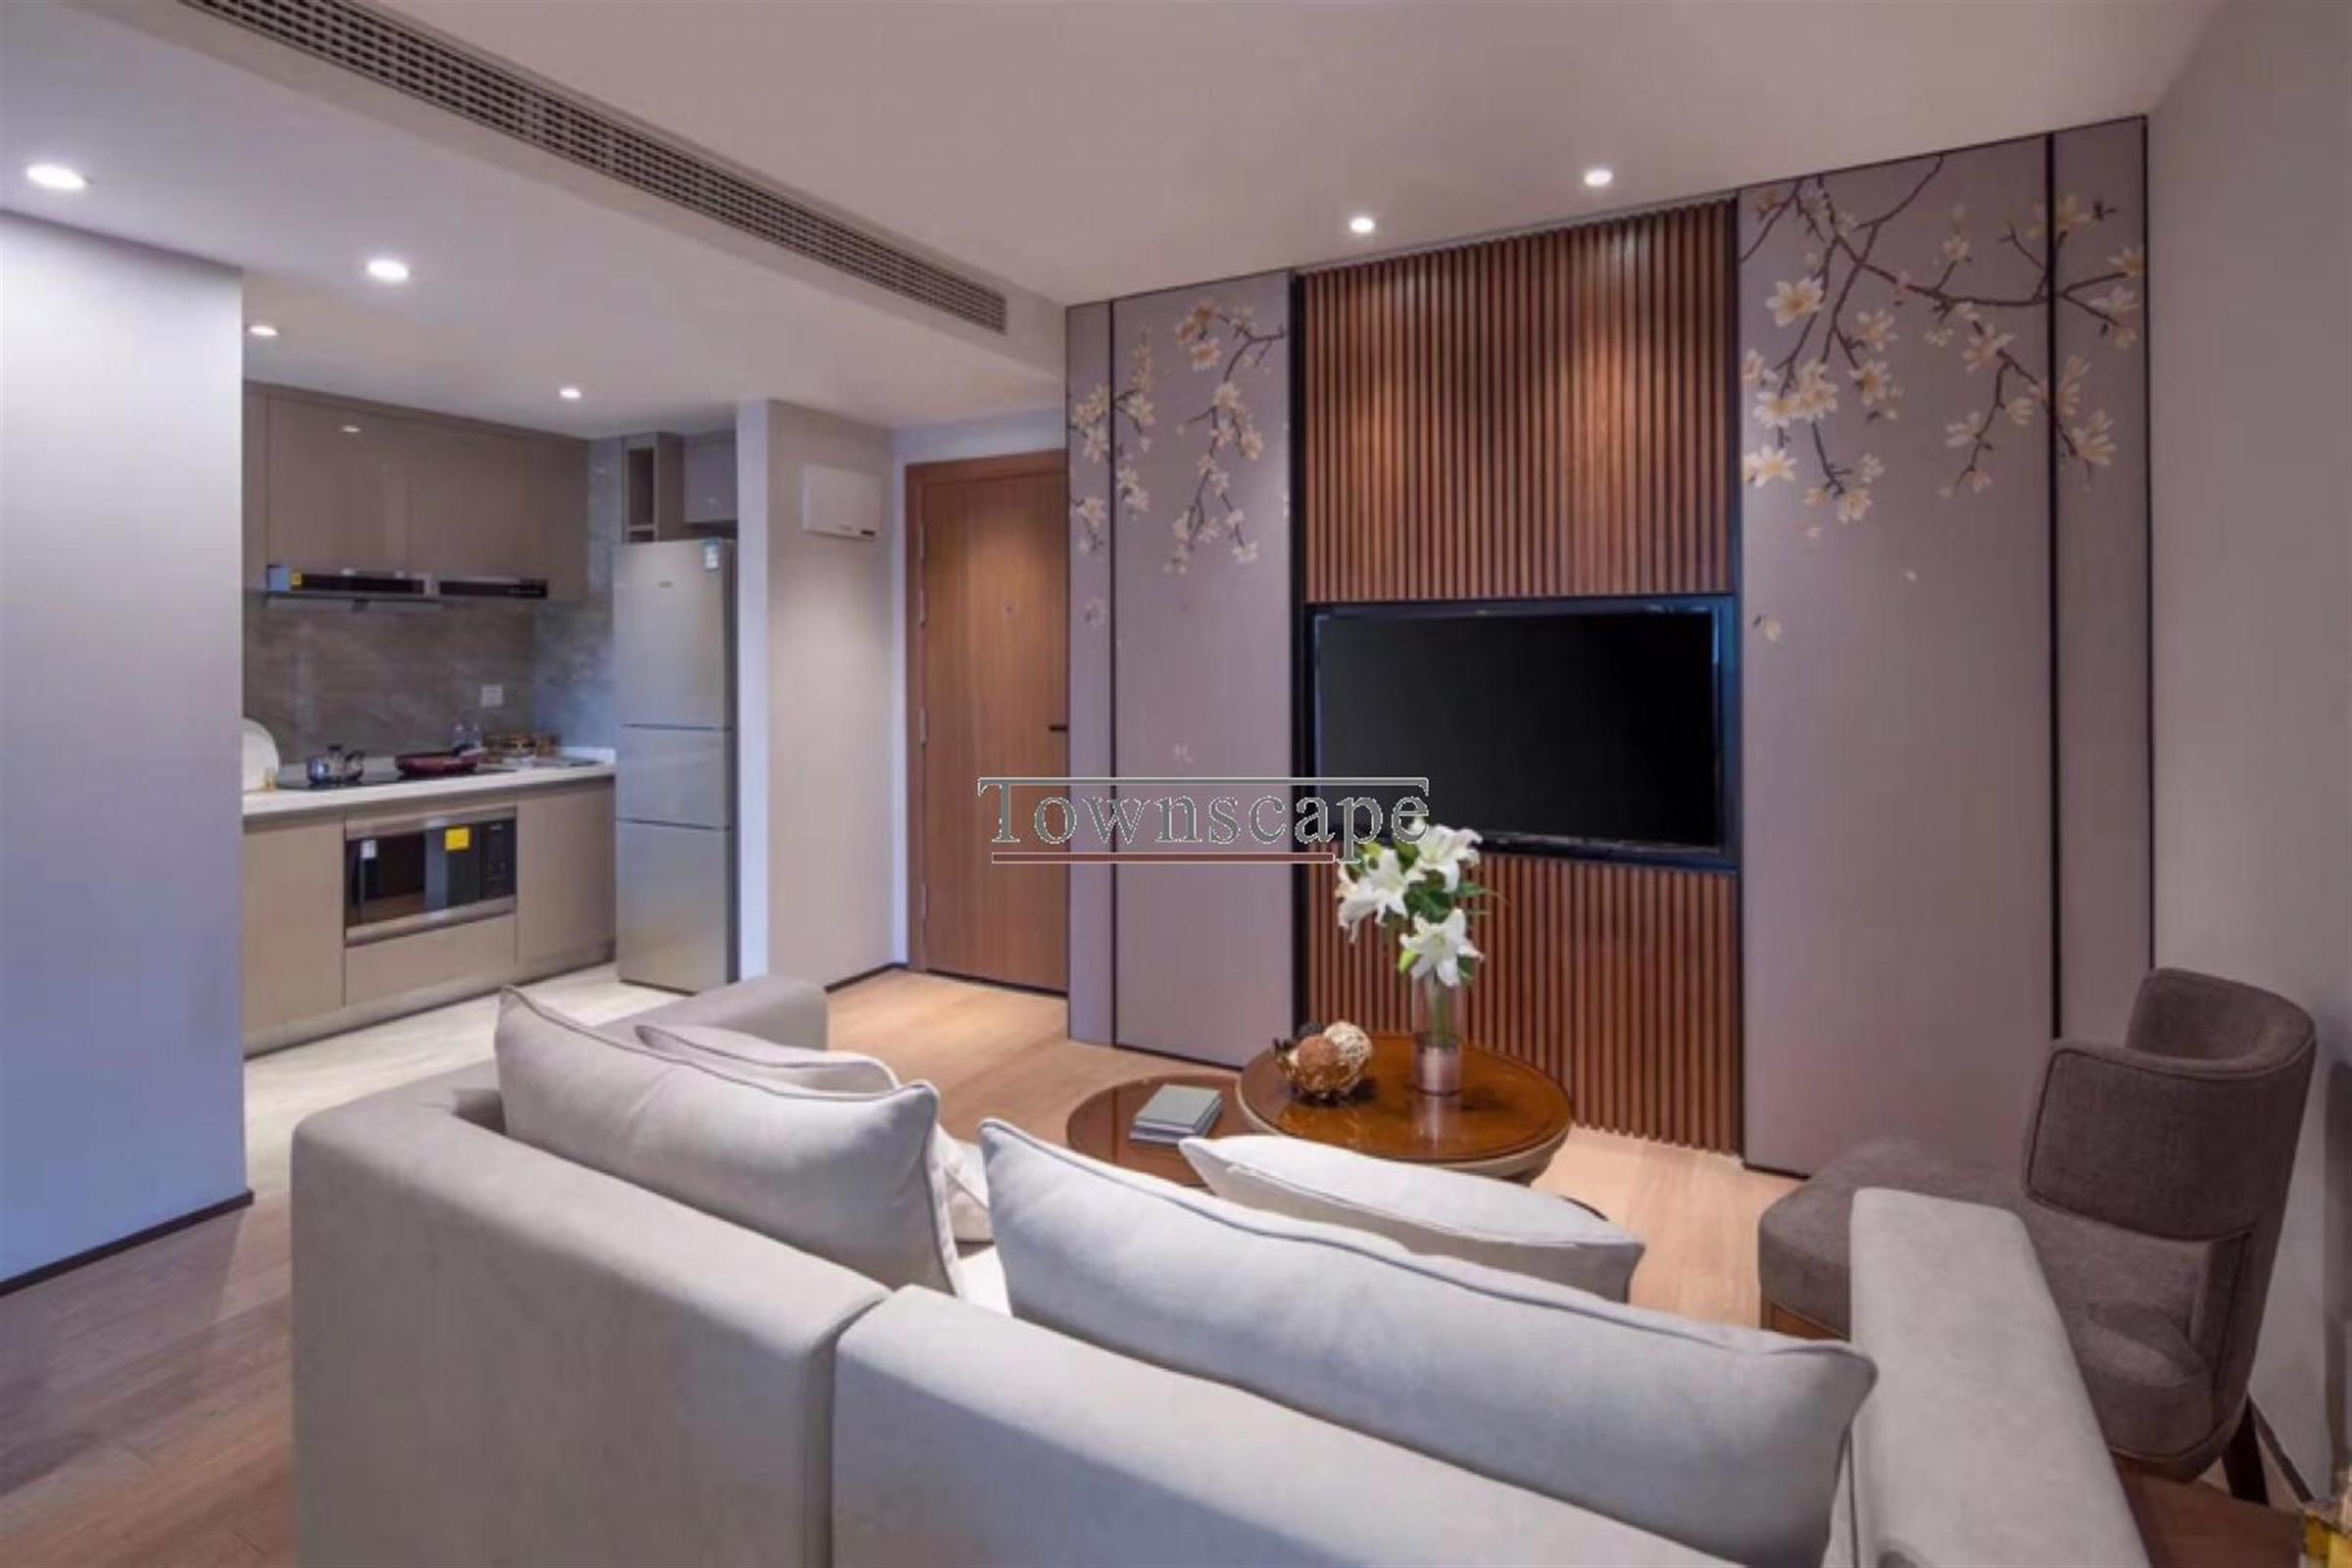 classy decor Beautifully Decorated, Newly Opened 1BR Service Apartments in Jing